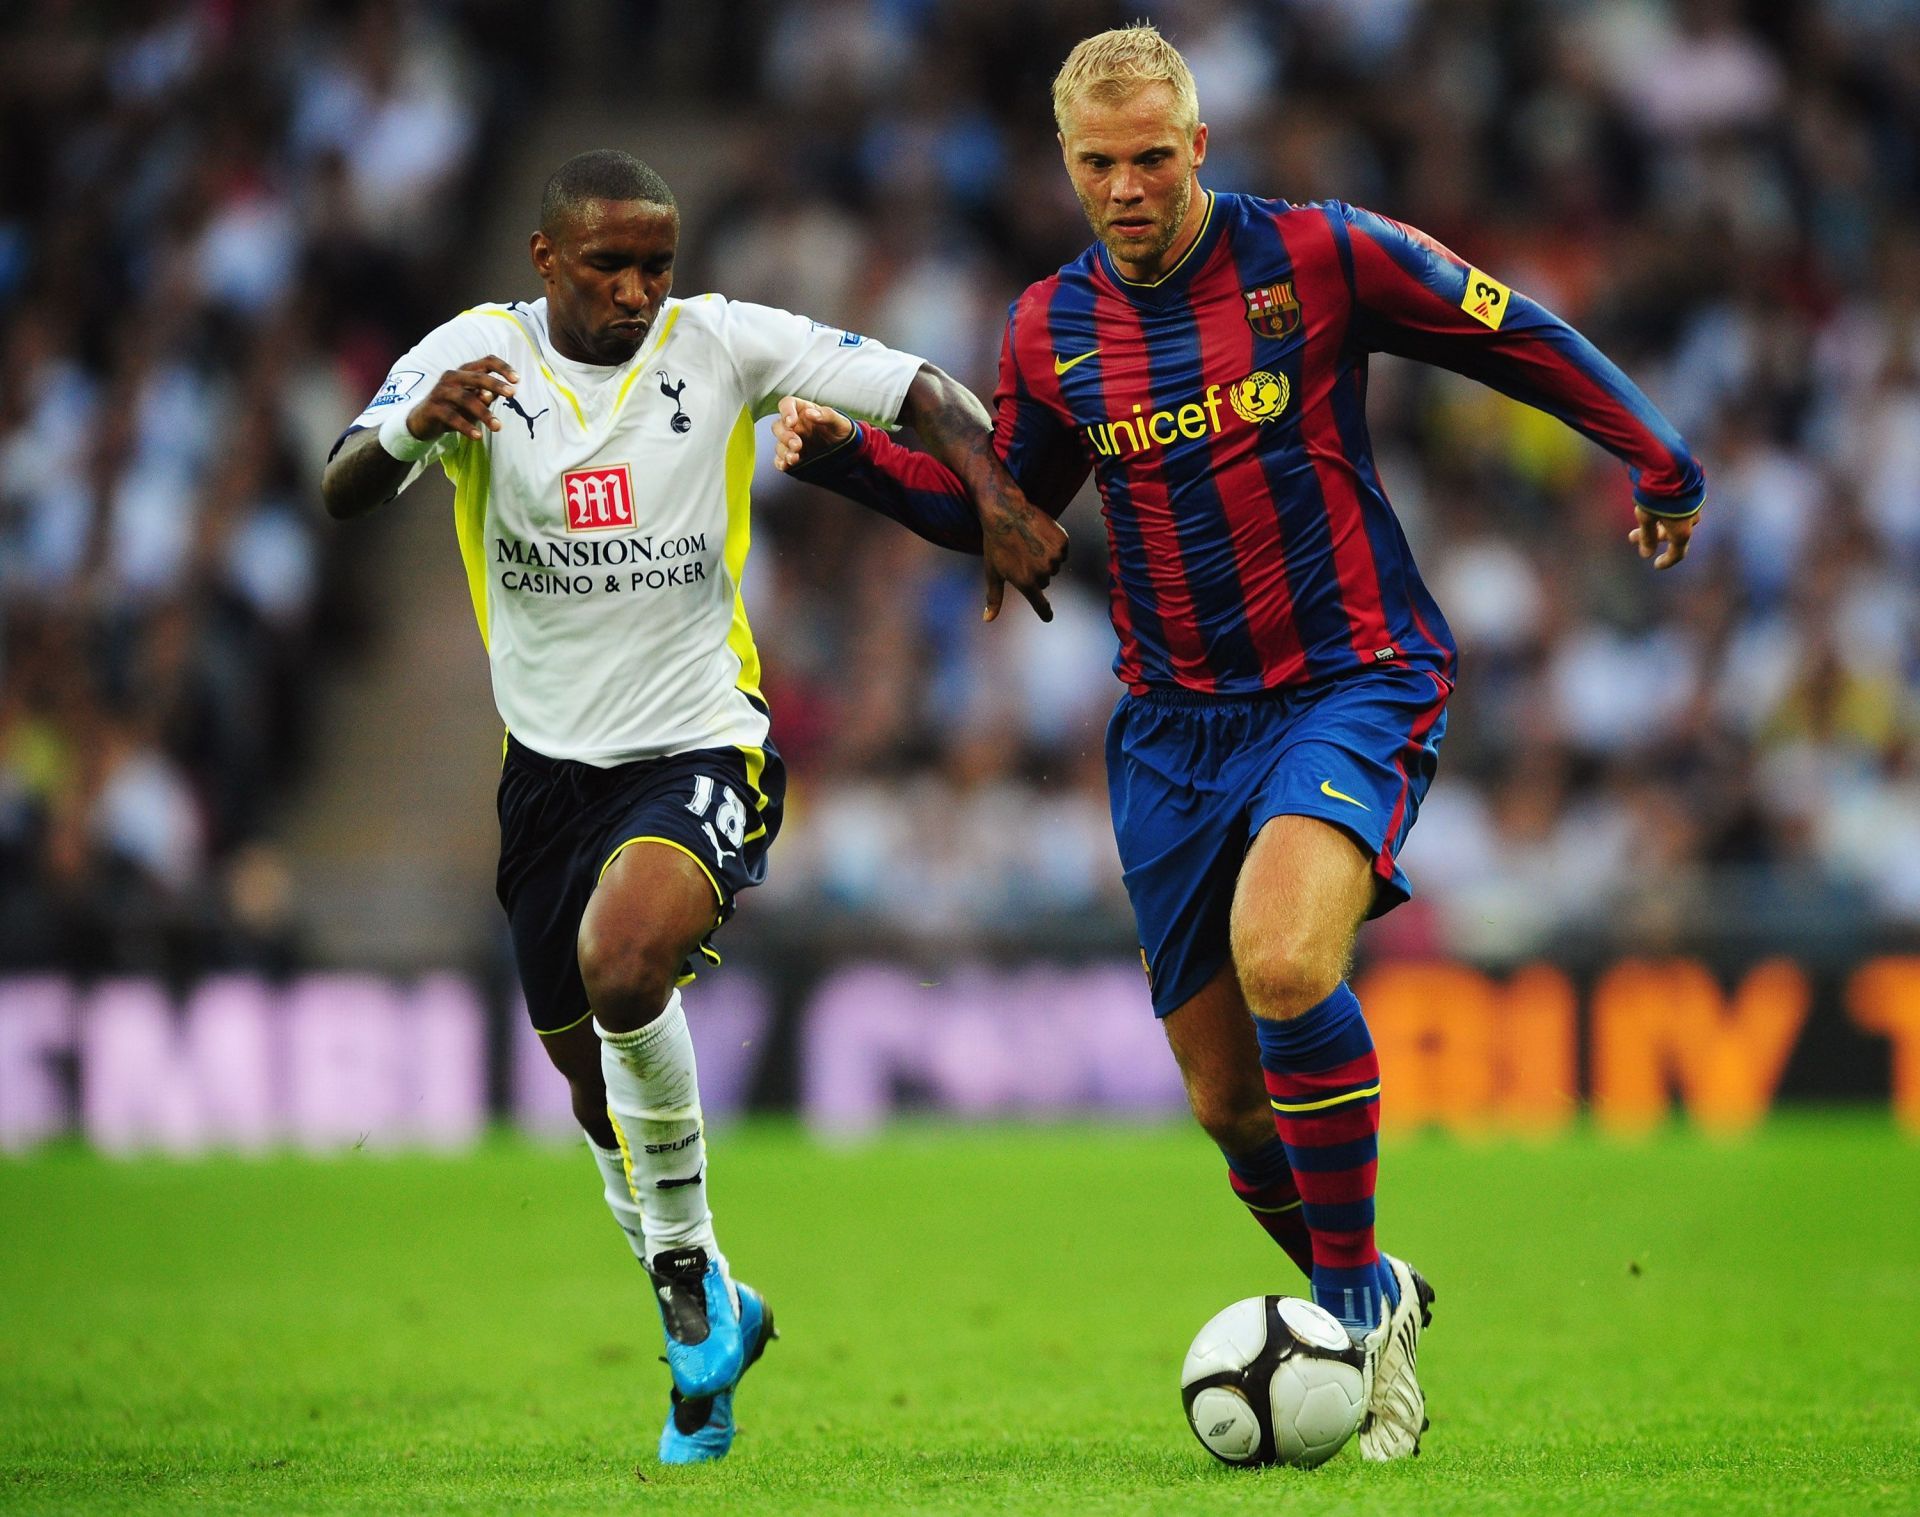 Gudjohnsen played for both Chelsea and Barcelona